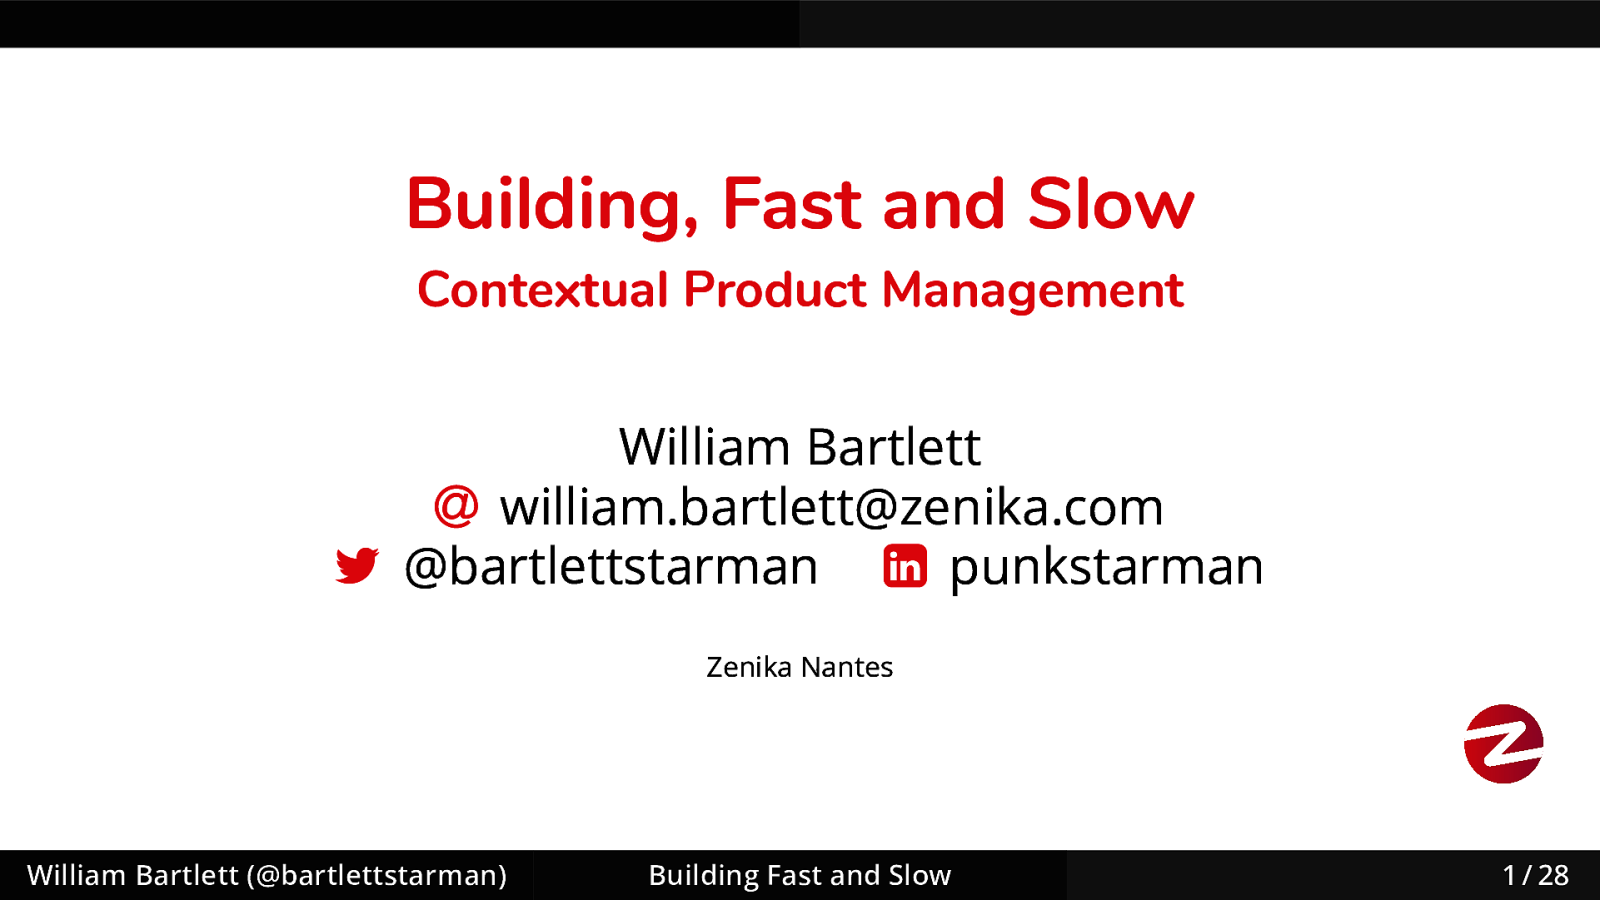 Building, Fast and Slow: Contextual Product Management